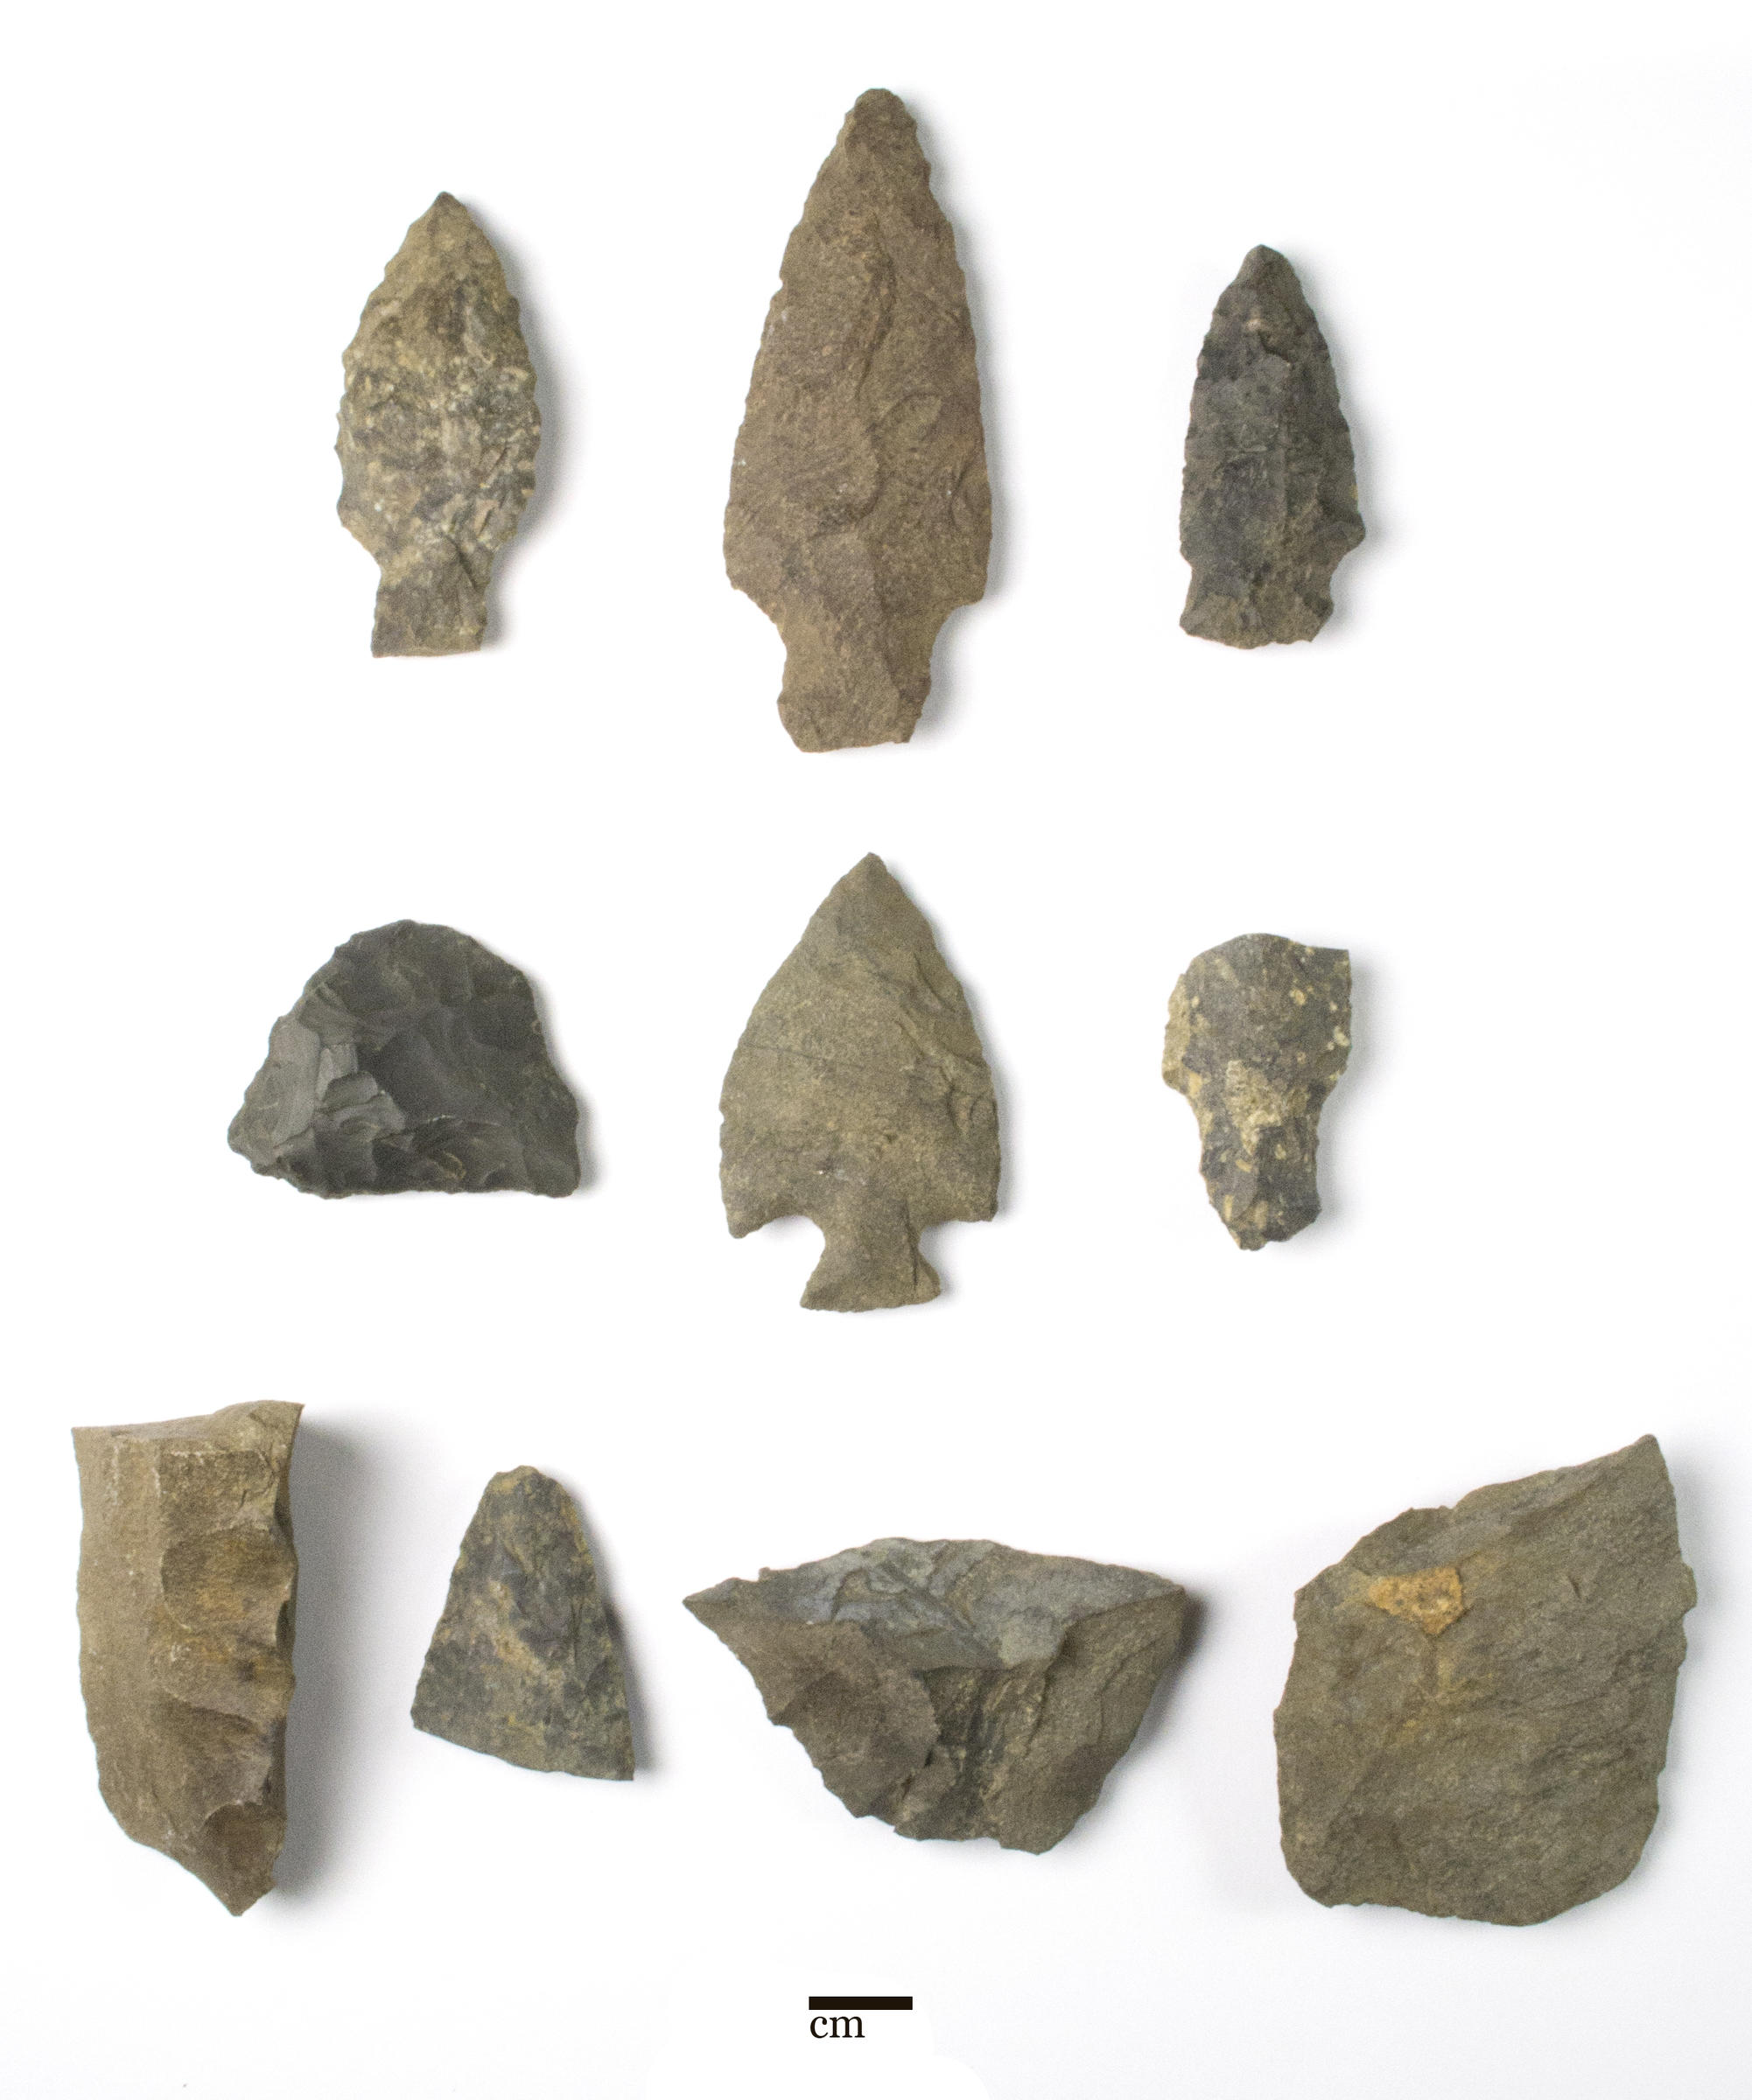 10 stone objects on a white background. The upper six are Native Massachusett spear points, the bottom four are fragments of stone tools